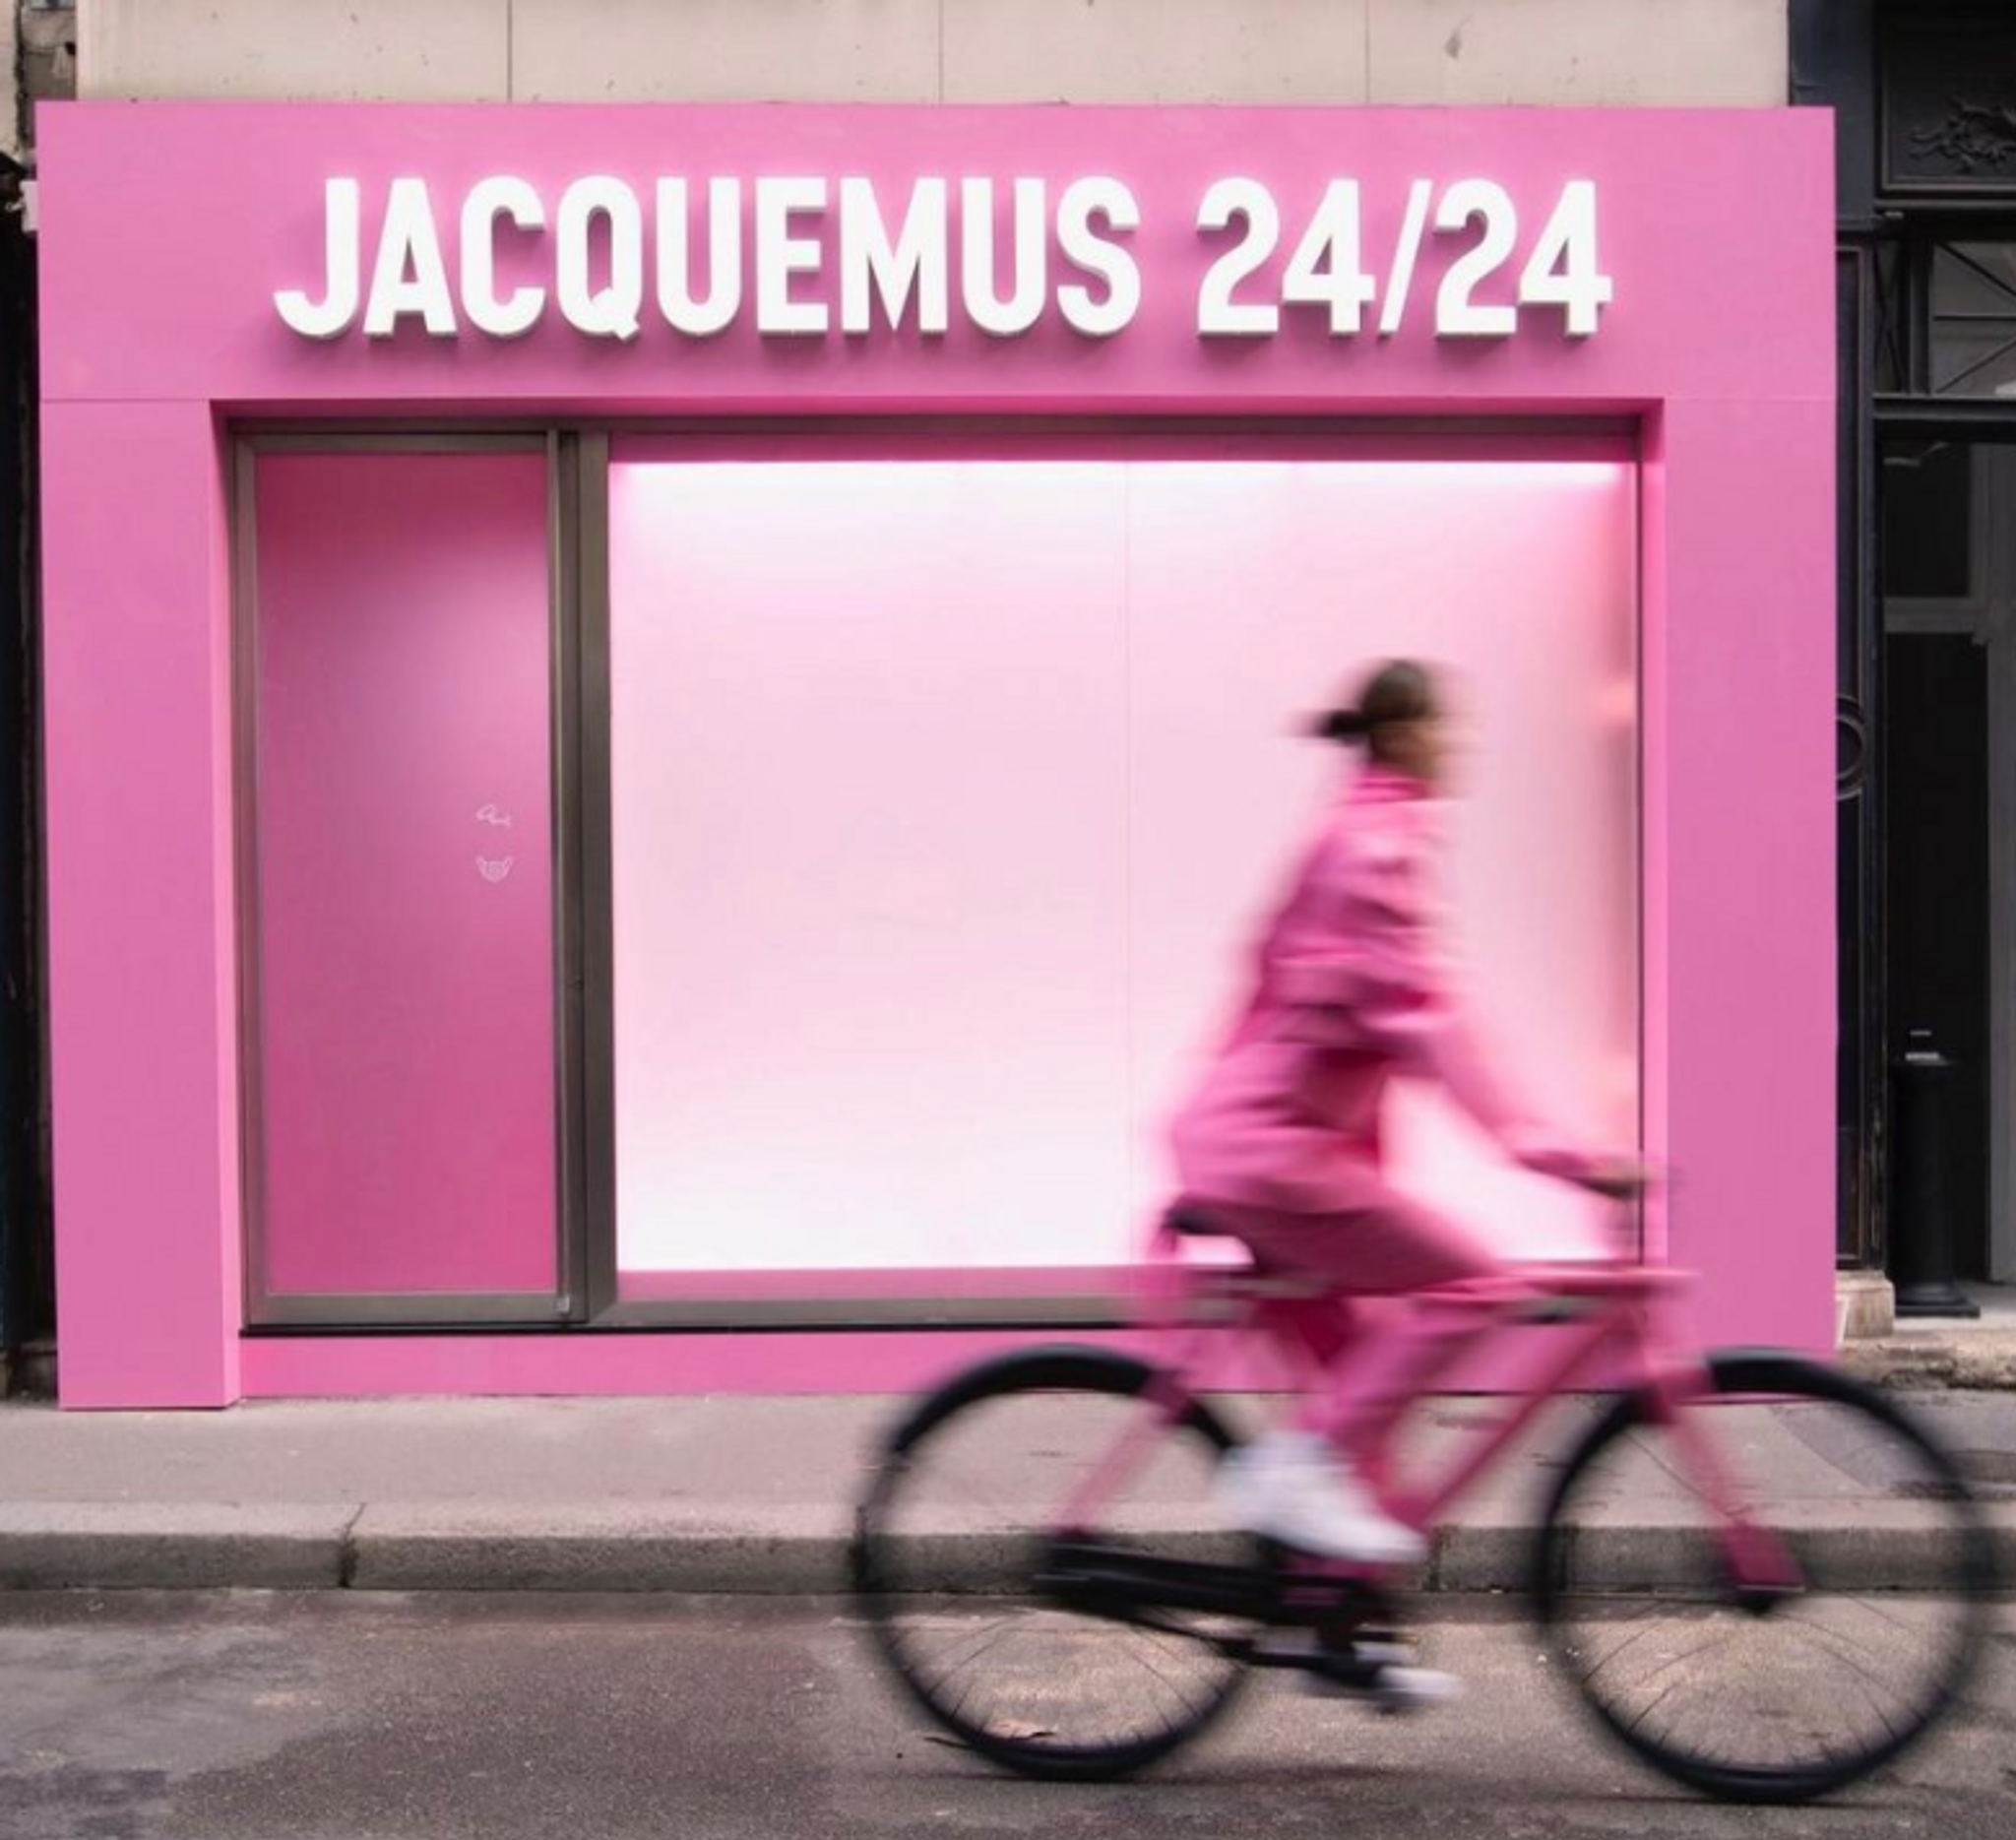 Jacquemus 24/24 pop-up store reflects always-on culture